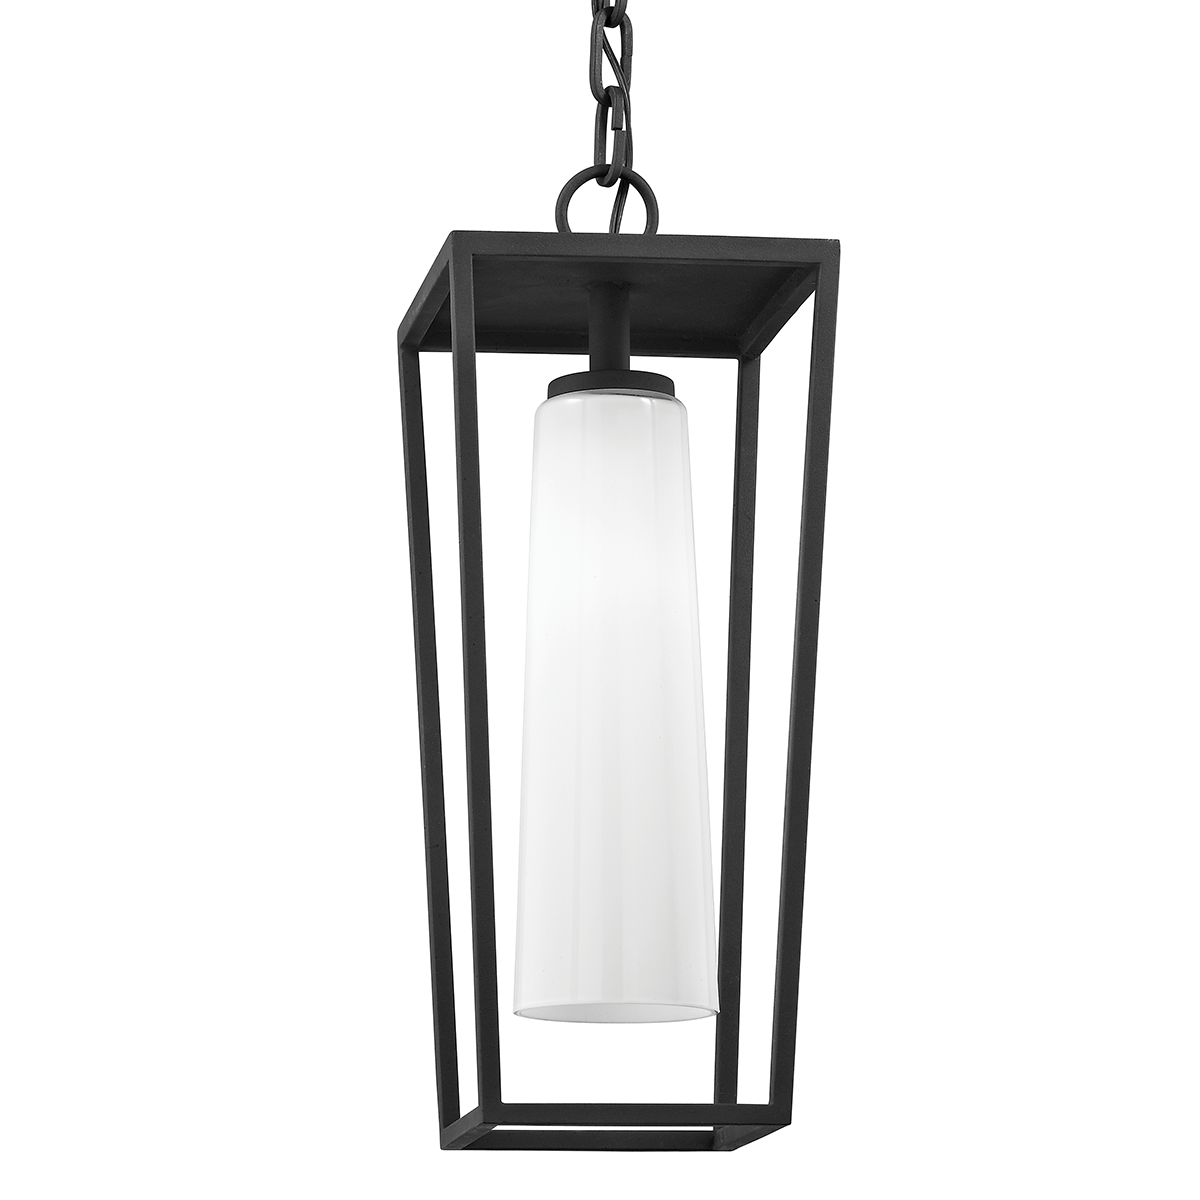 Troy Lighting MISSION BEACH 1LT HANGER F6357 Outdoor l Wall Troy Lighting TEXTURED BLACK  